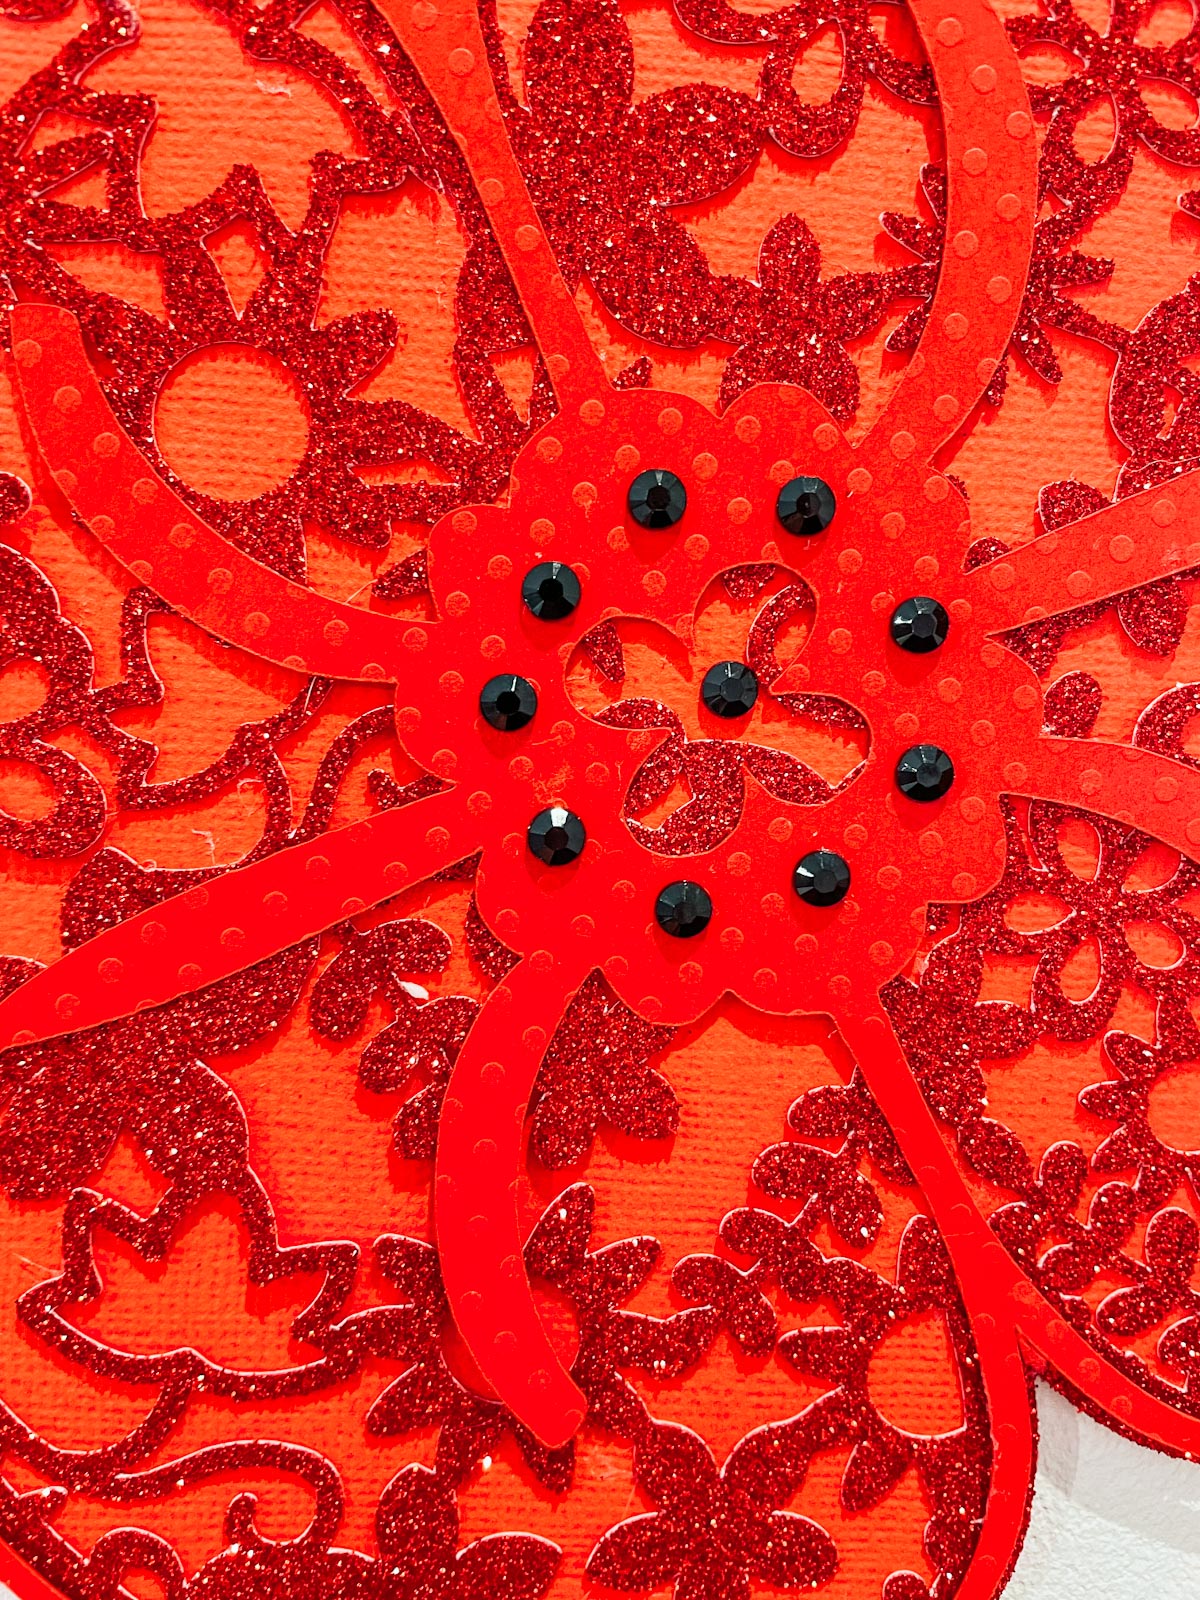 Attaching the poppy seeds with black rhinestones